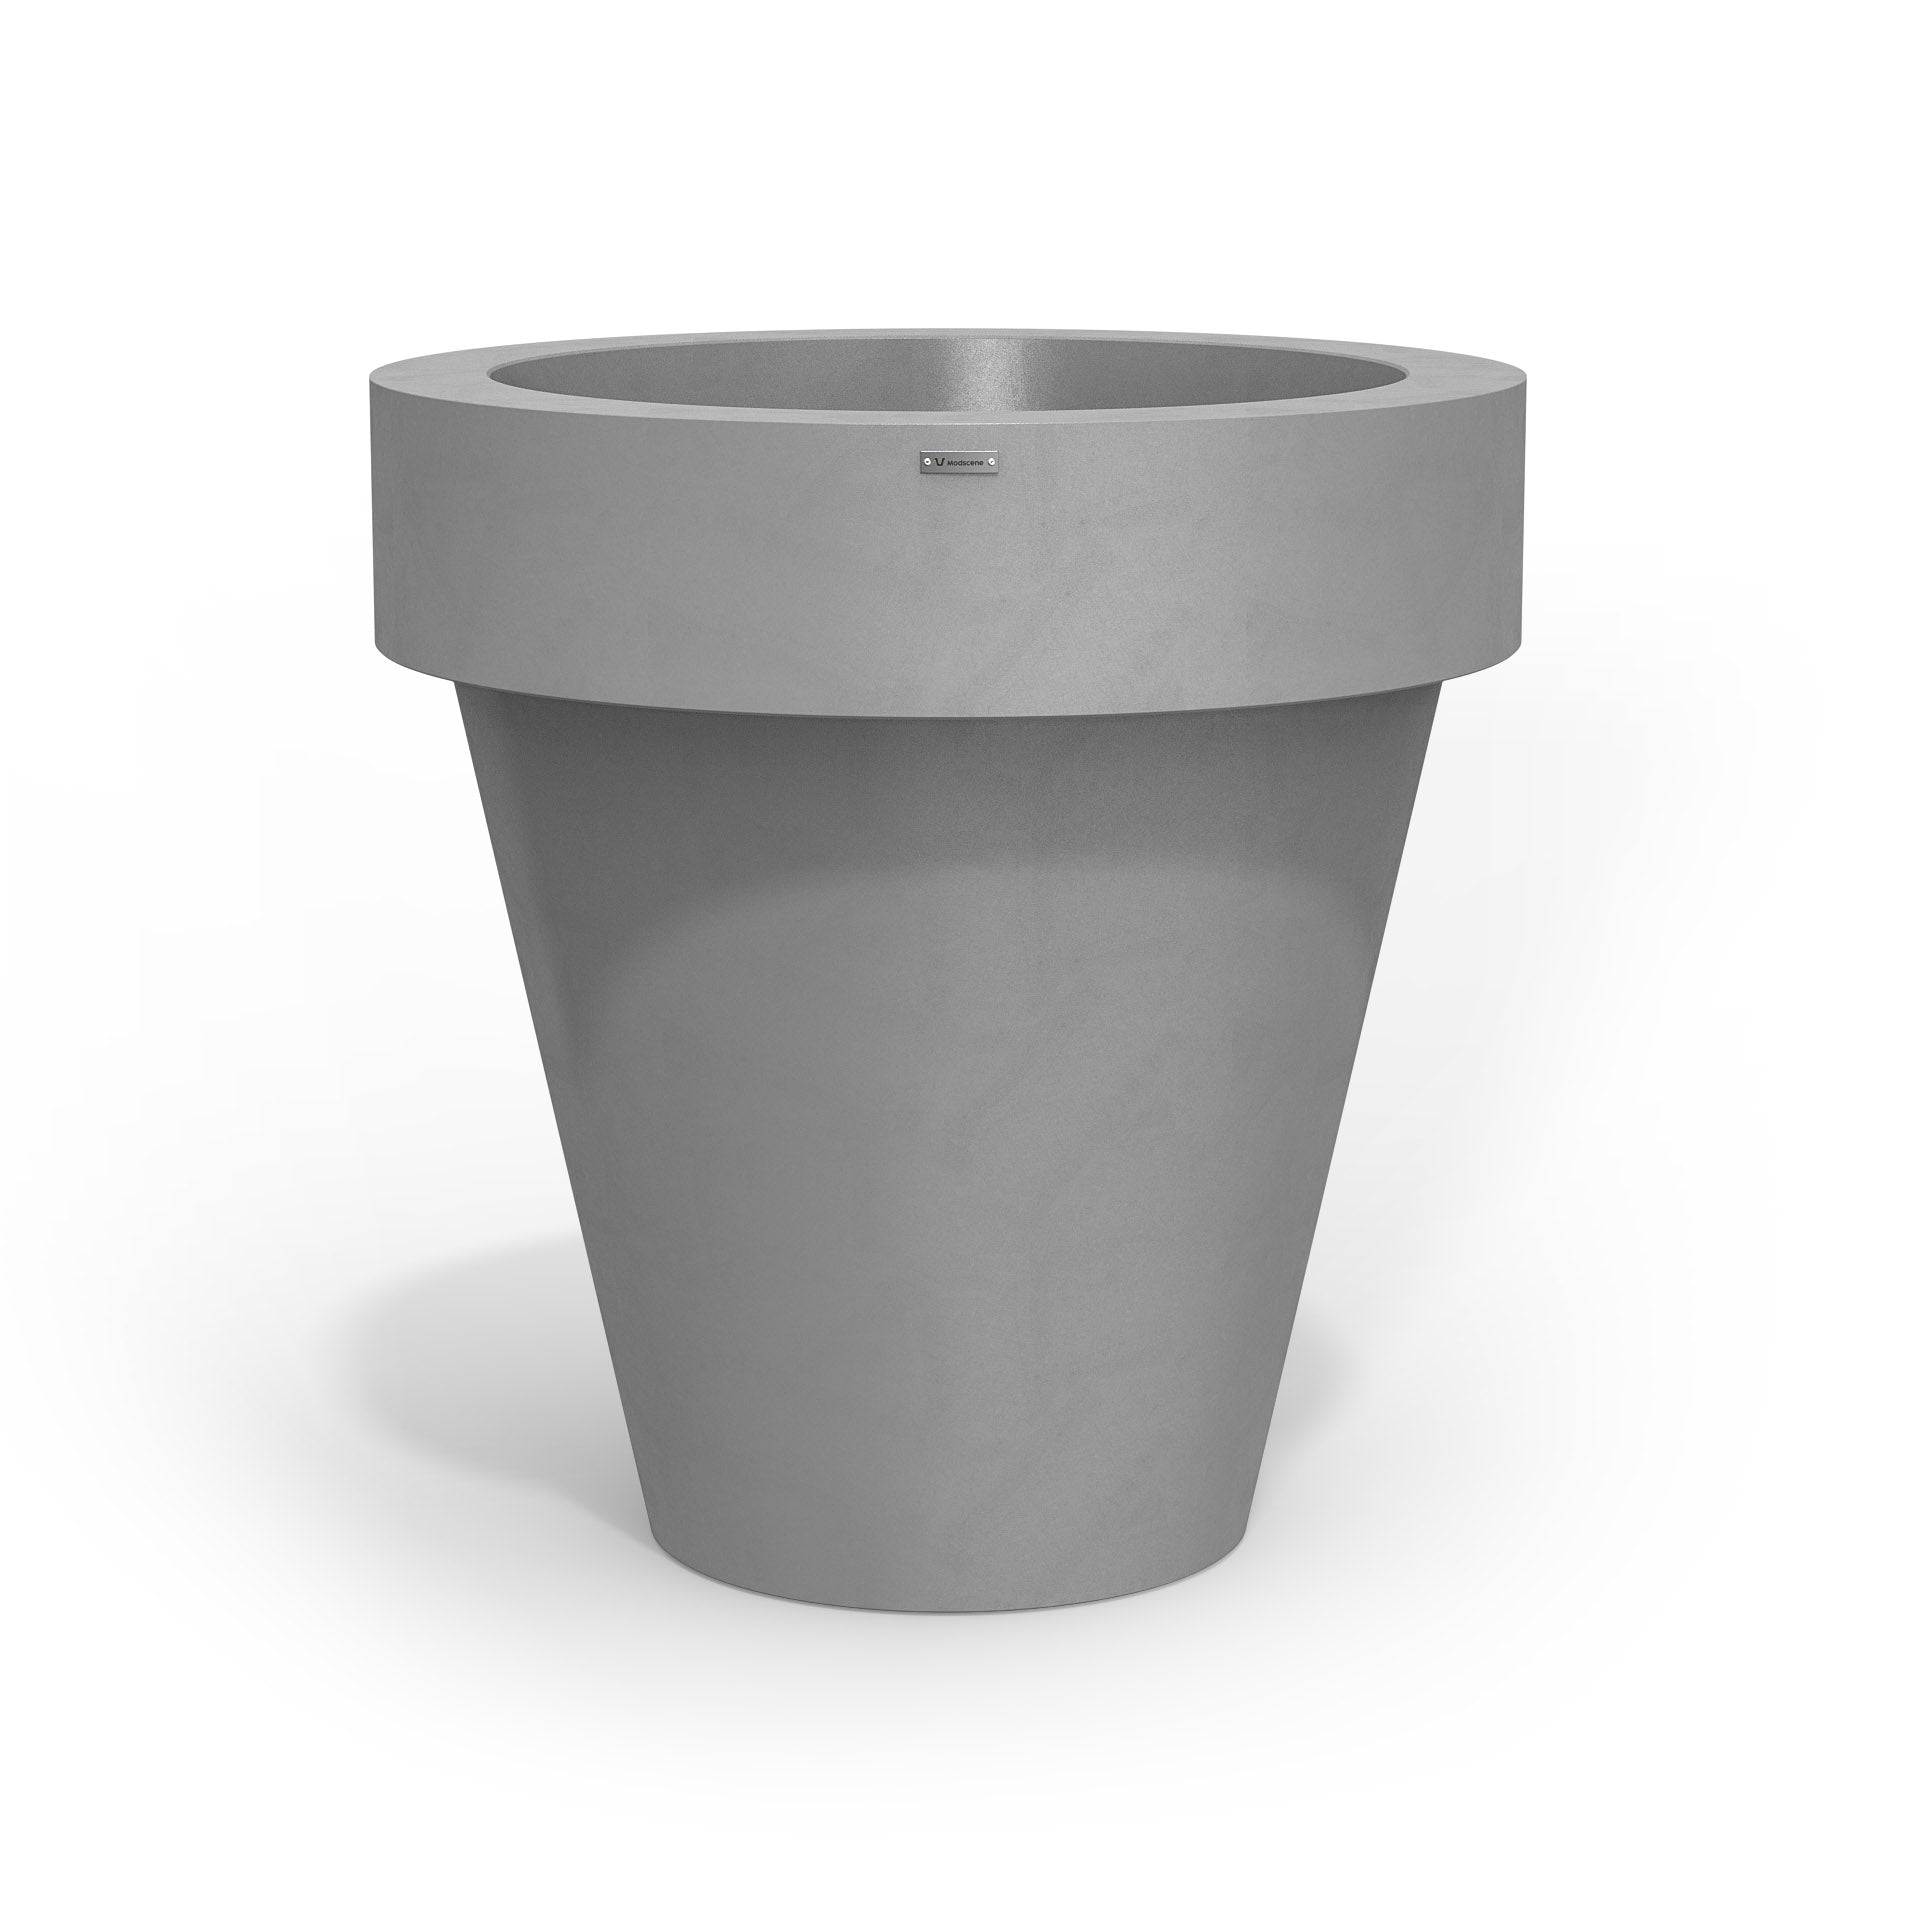 Extra large Modscene planter pot in a light grey colour with a concrete look.